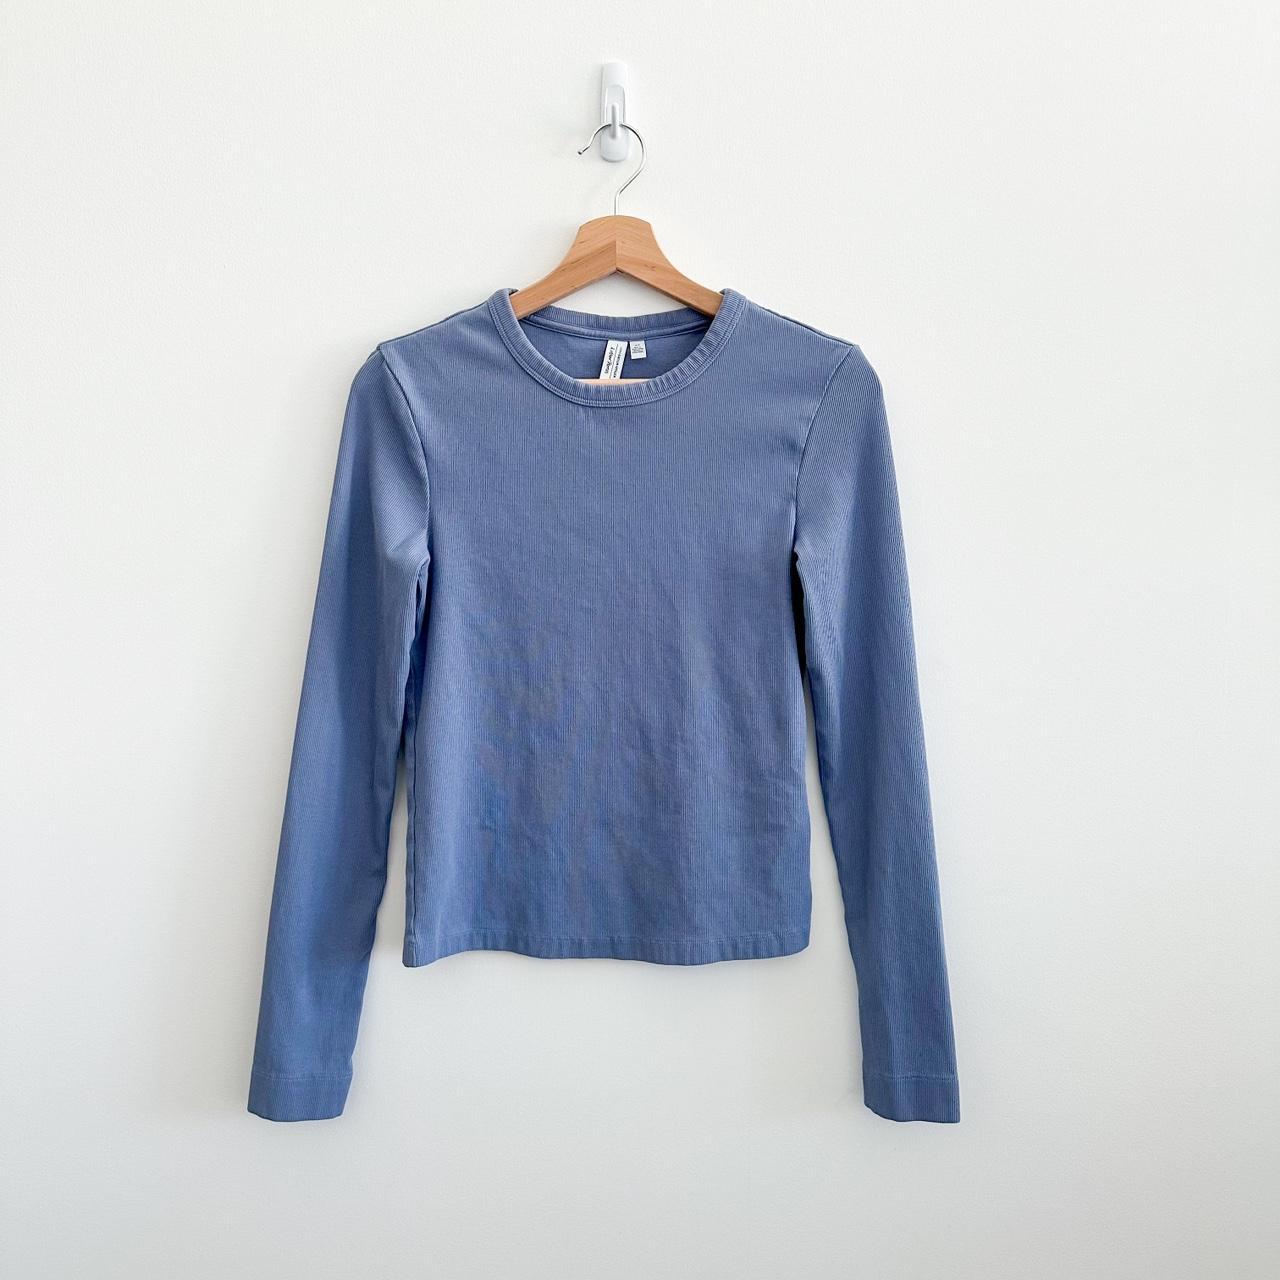 Women's Long Sleeve Tops  Tops & T-shirts - & Other Stories